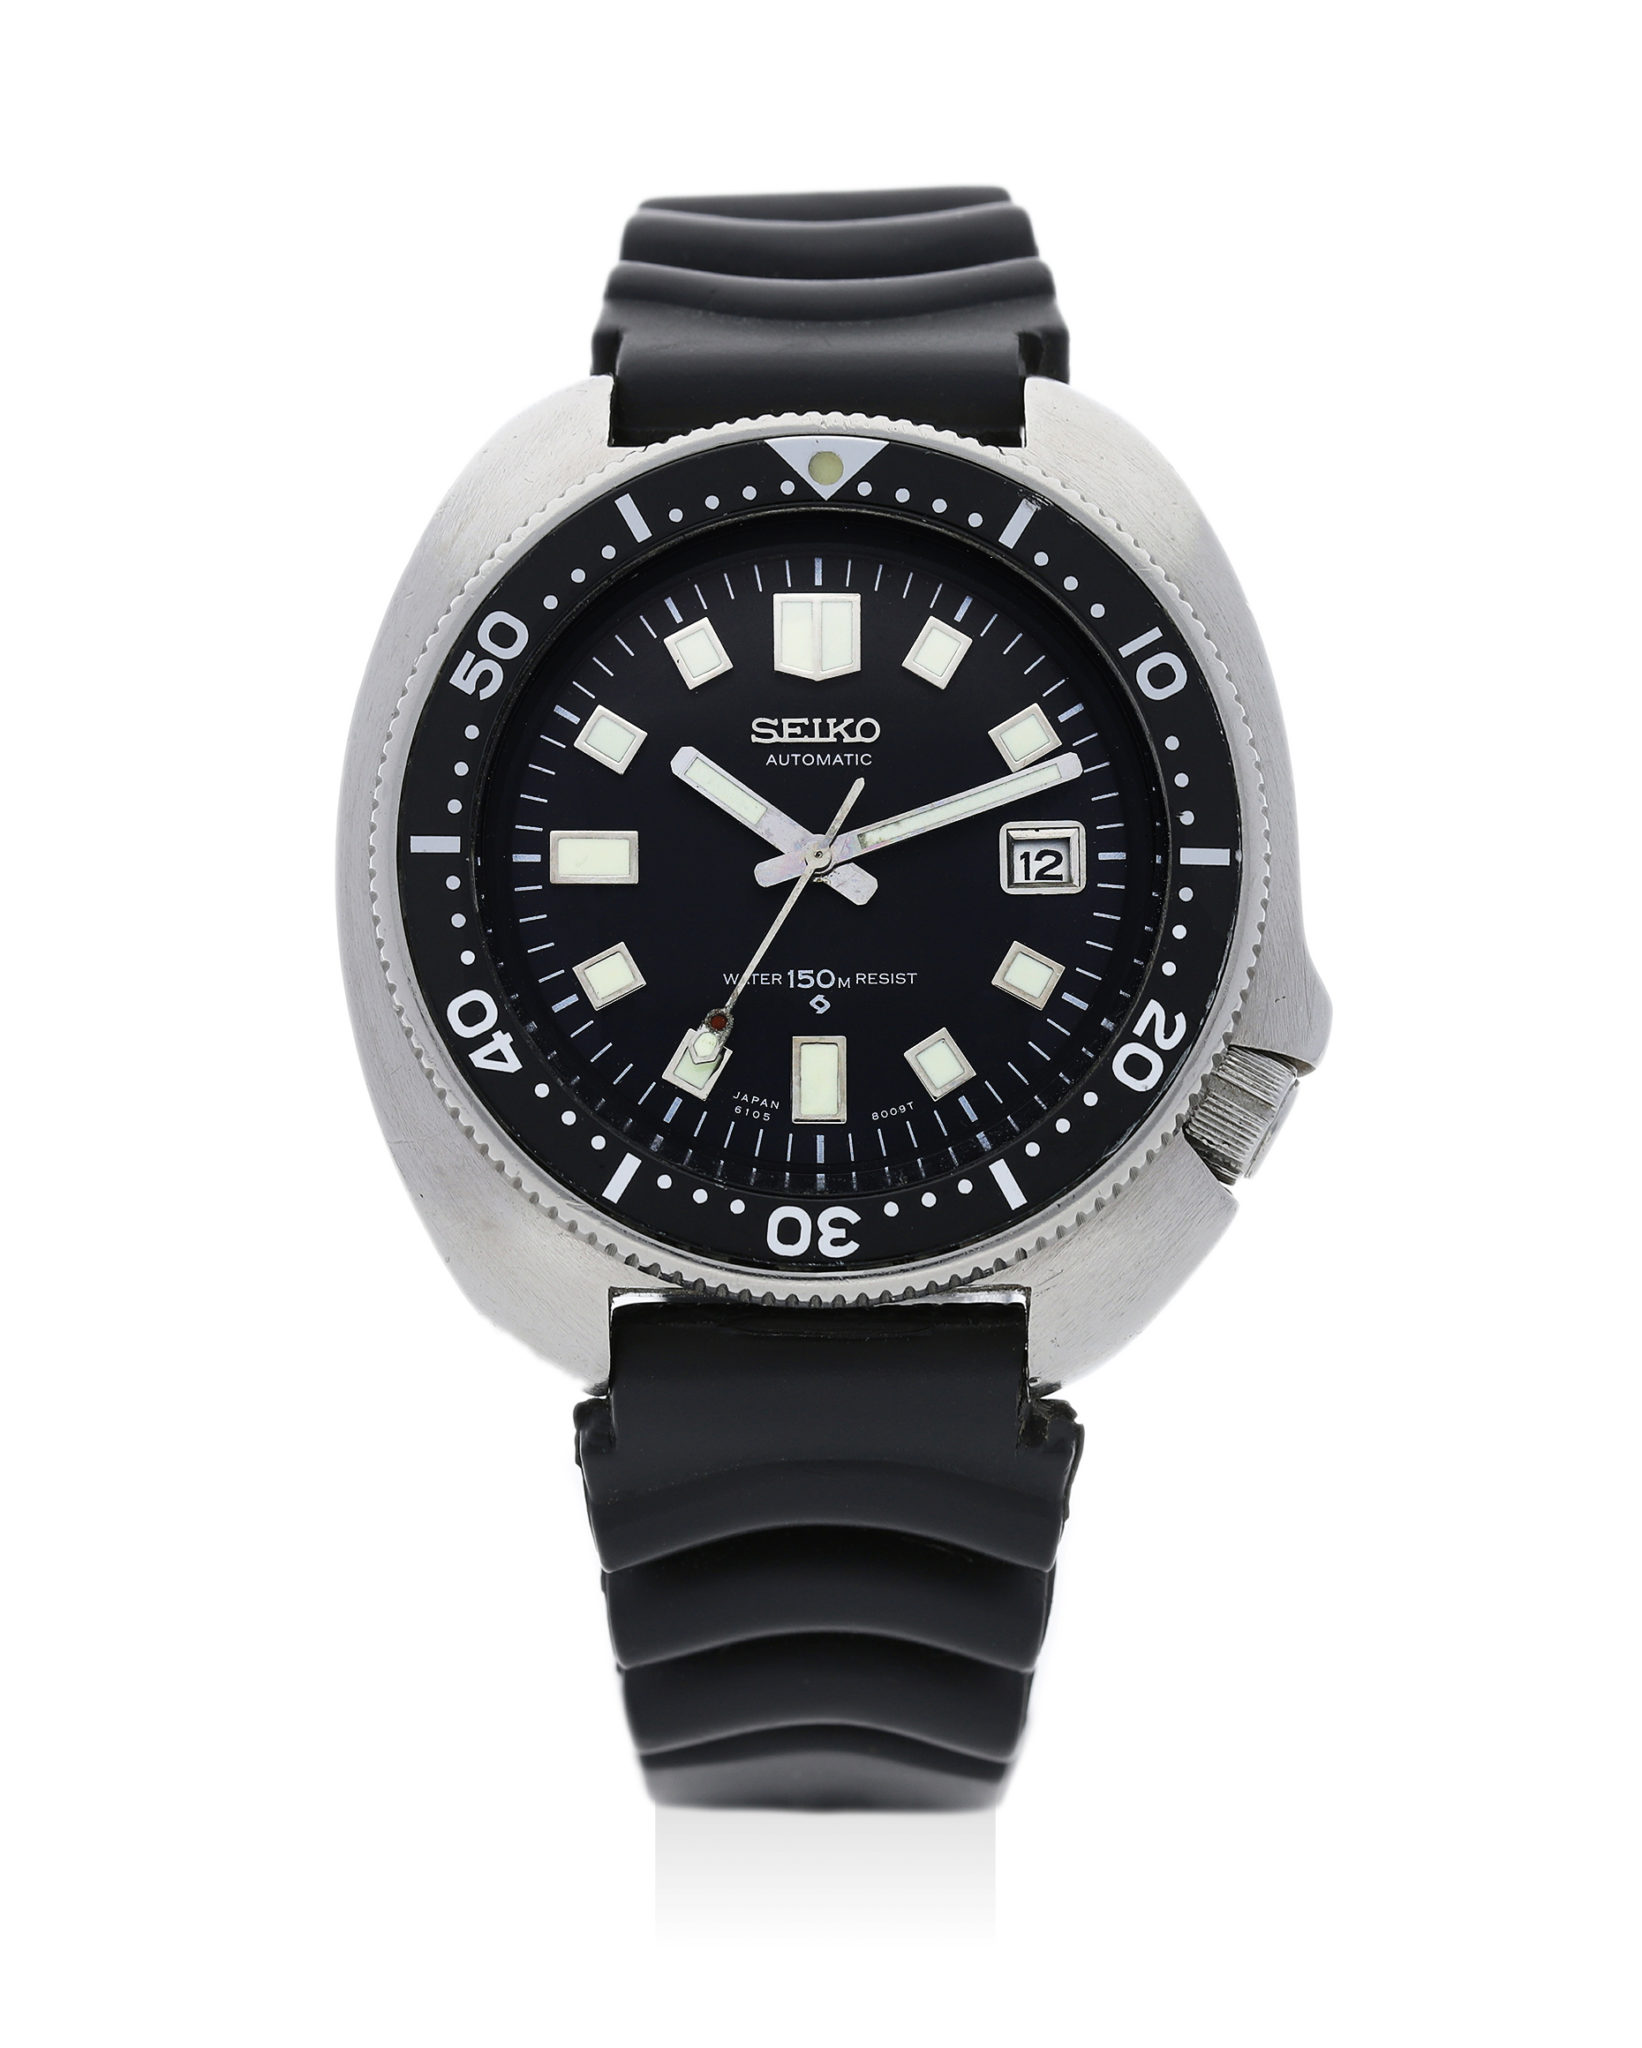 Bonhams hosts online auction for 200 collectible Seiko watches